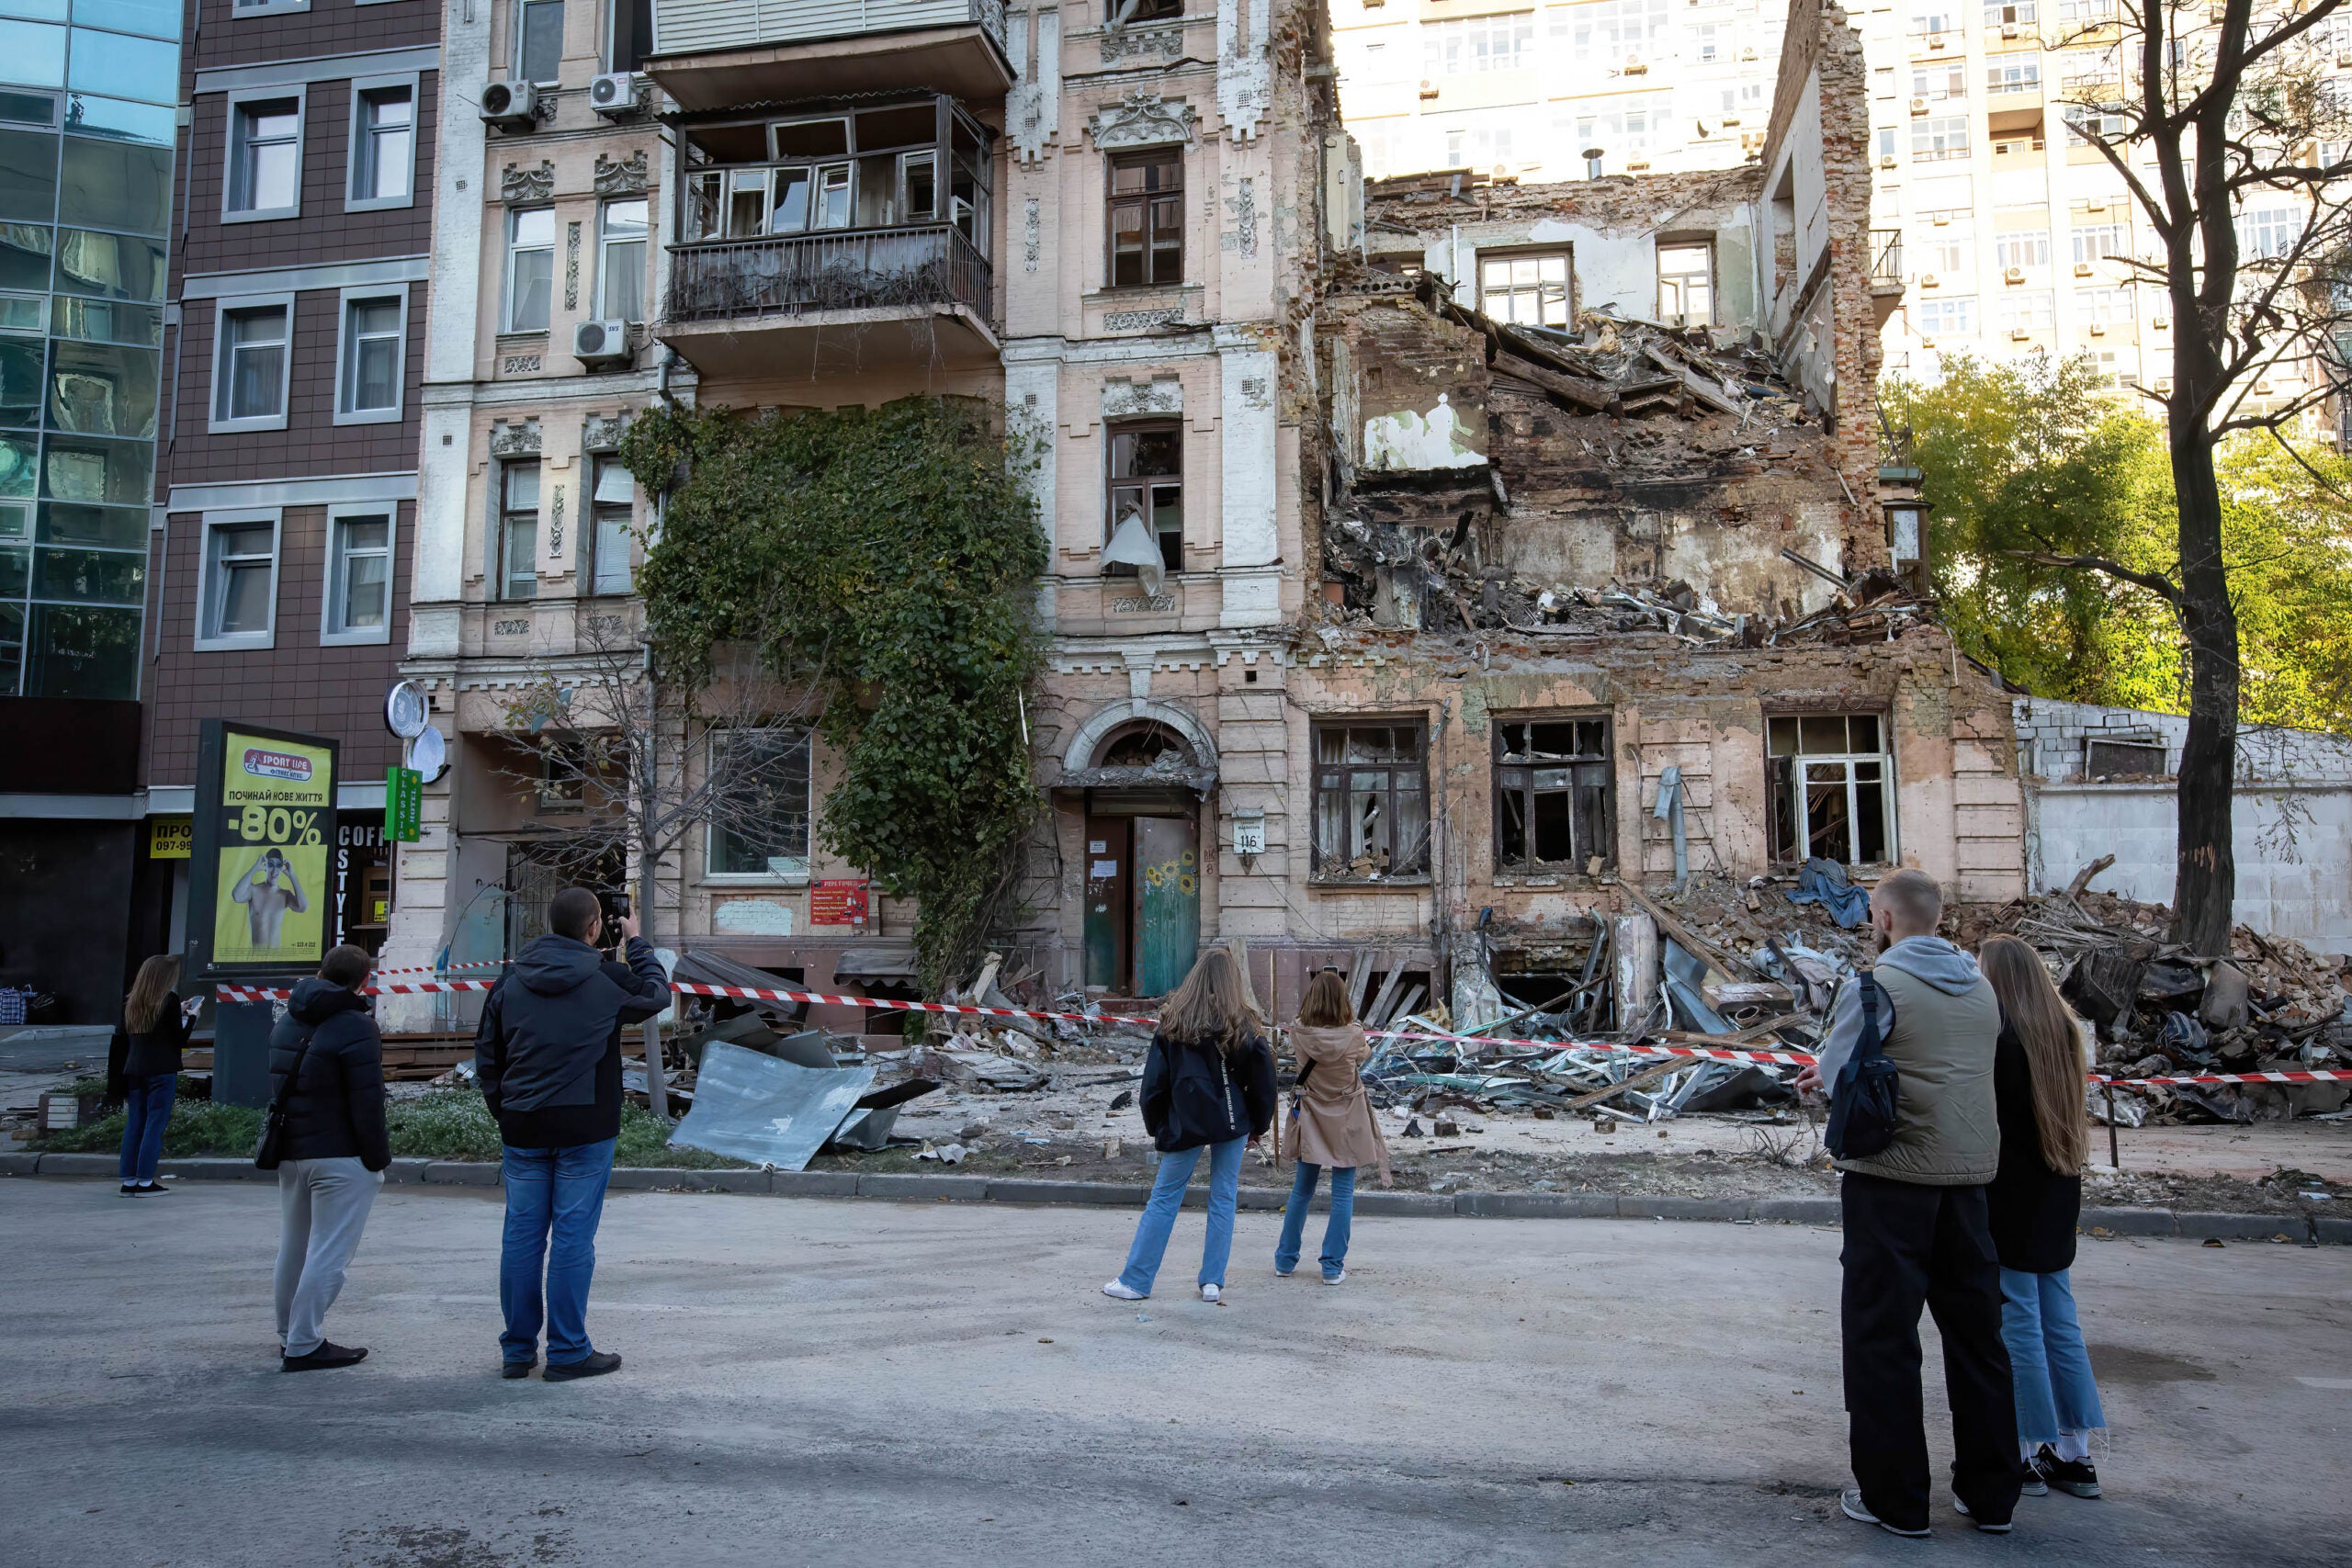 KYIV, UKRAINE - 2022/10/18: People look at the residential building destroyed by a Russian drone strike, which local authorities consider to be Iranian-made unmanned aerial vehicles (UAVs) Shahed-136, in central Kyiv. At least four people have been killed as a result of a drone attack on a residential building in Kyiv on the morning of October 17, 2022. (Photo by Oleksii Chumachenko/SOPA Images/LightRocket via Getty Images)